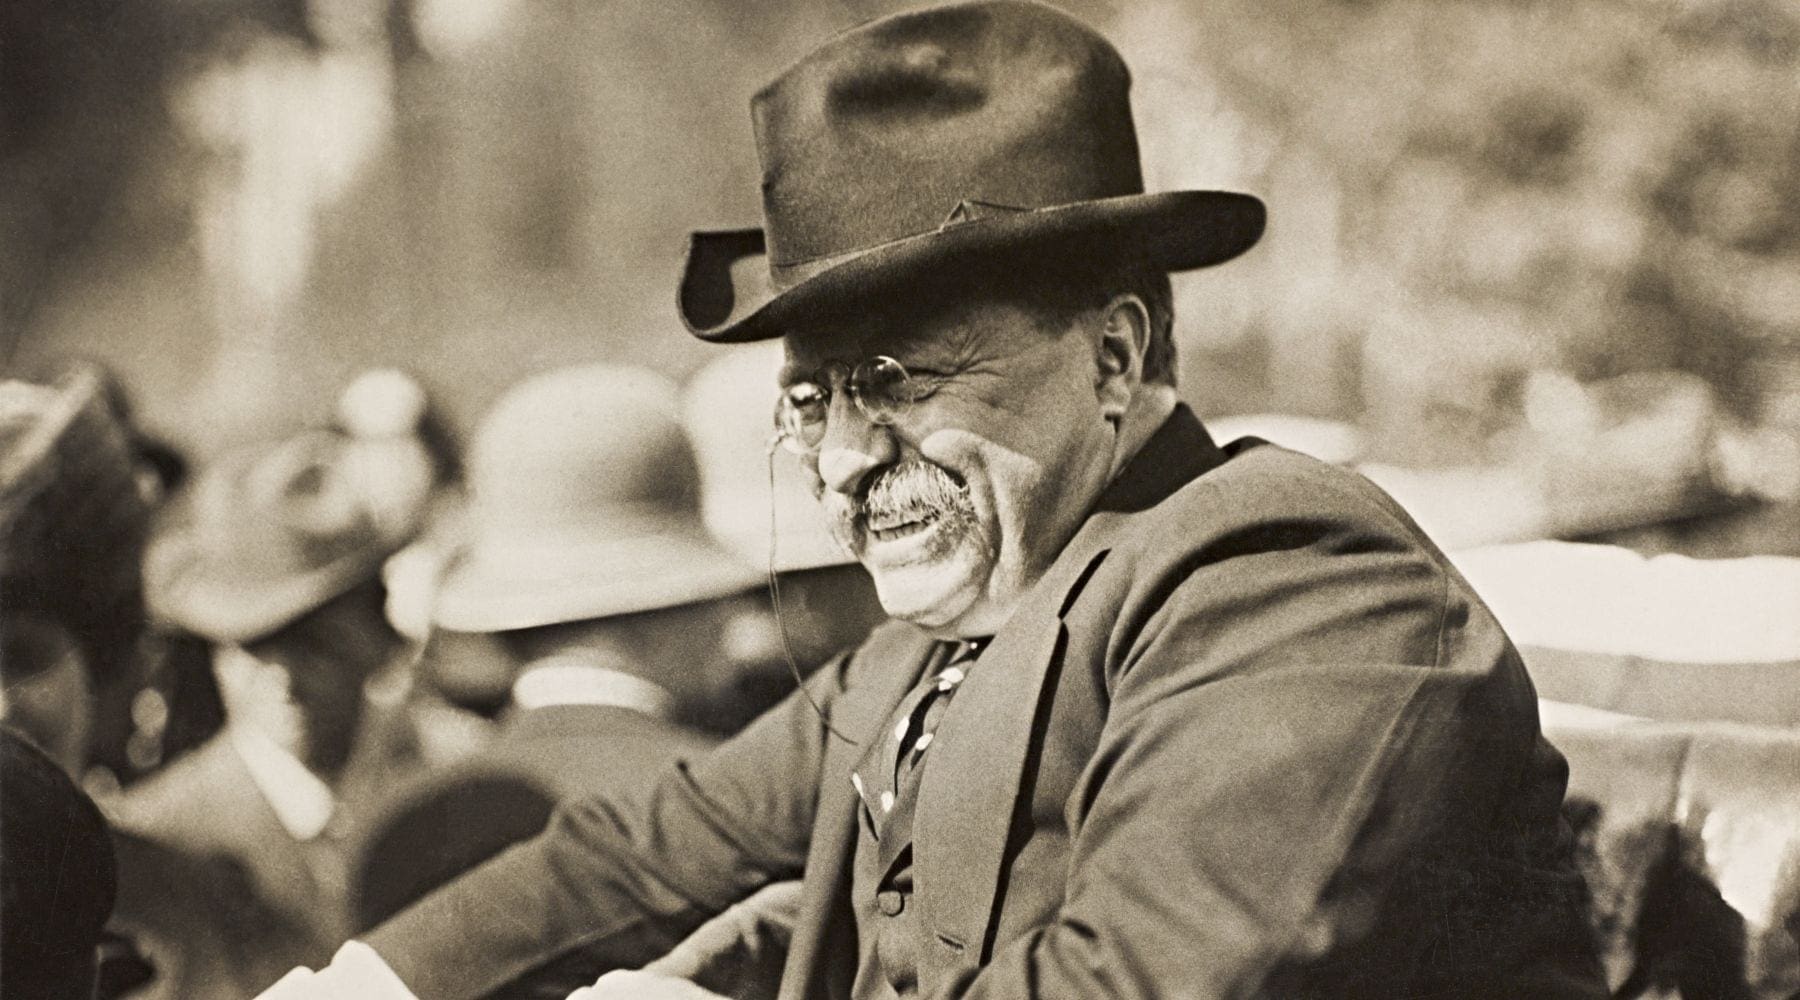 How Teddy Roosevelt Prevented US from Becoming More Inclusive